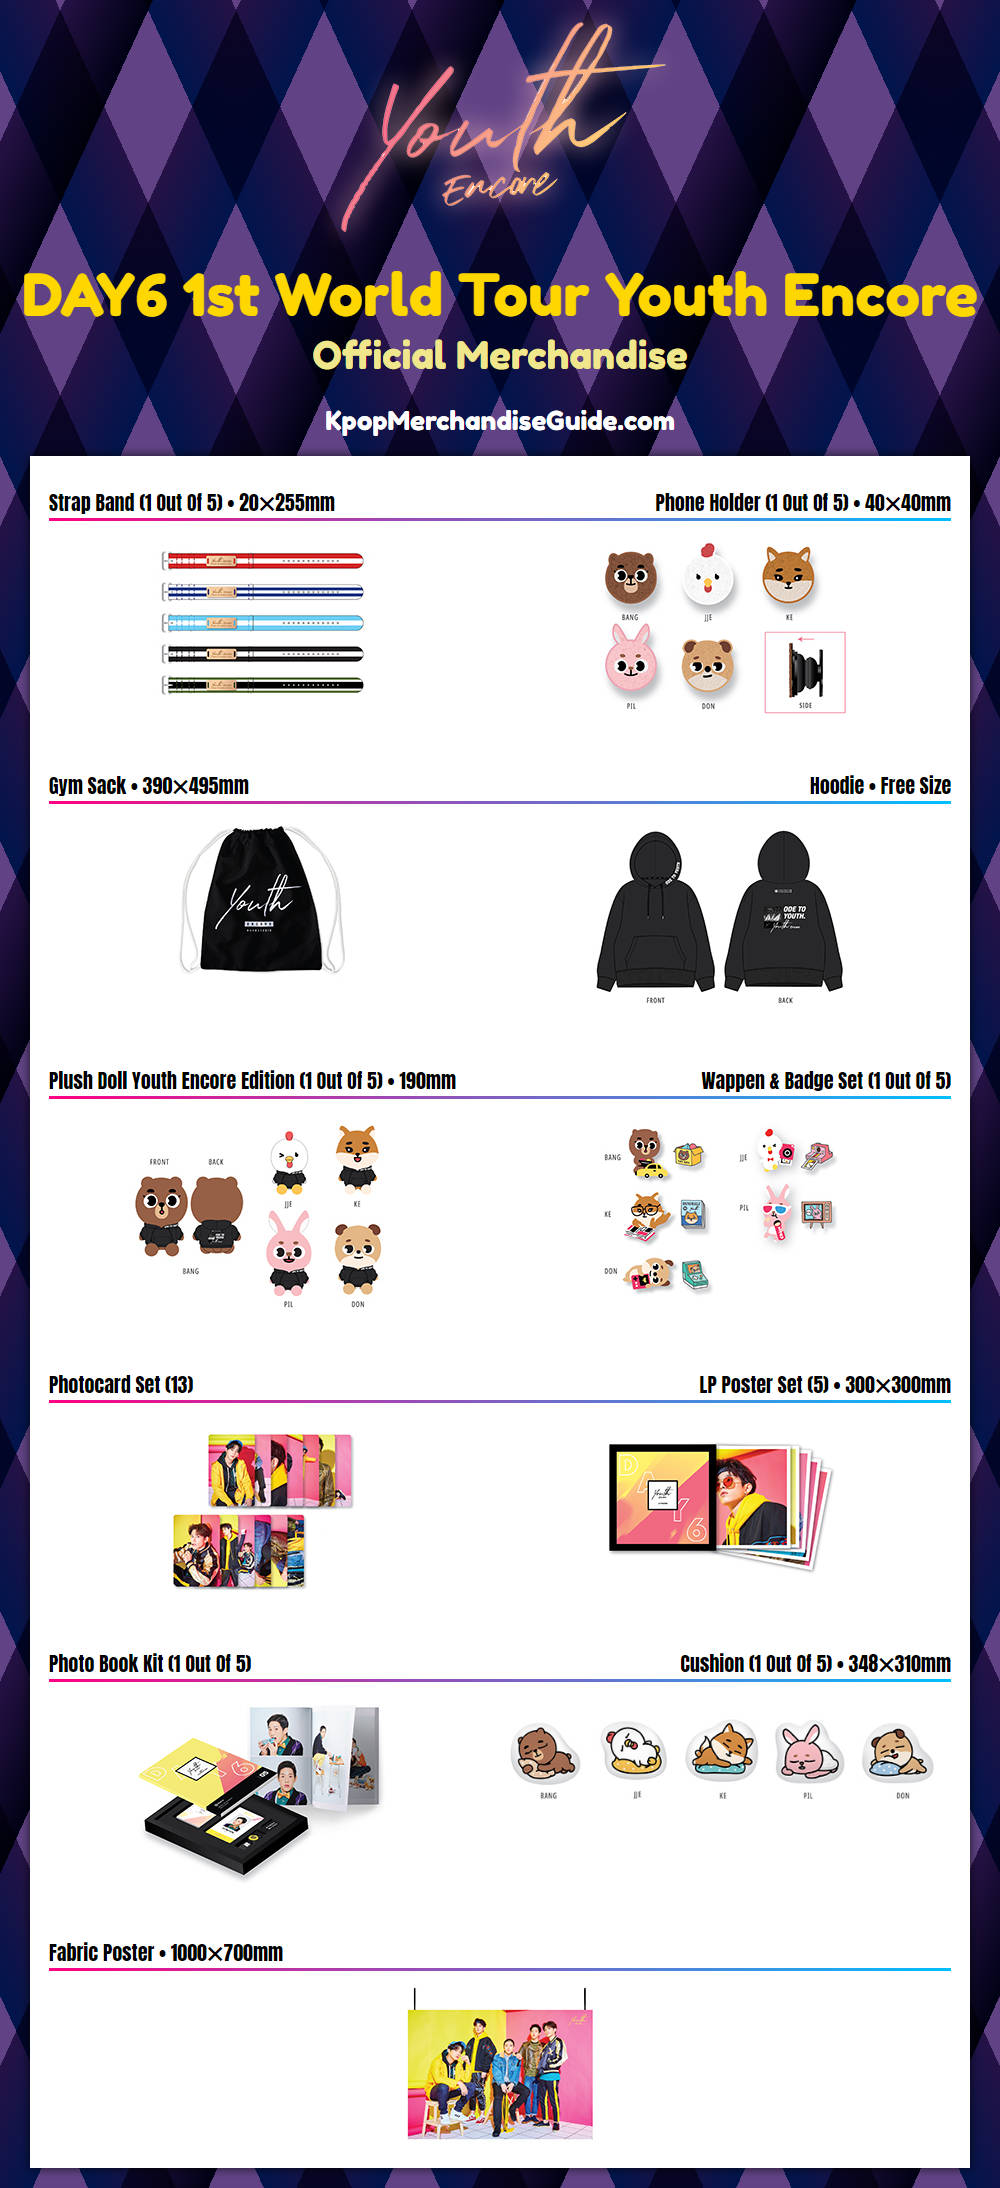 Day6 1st World Tour Youth Encore Merchandise